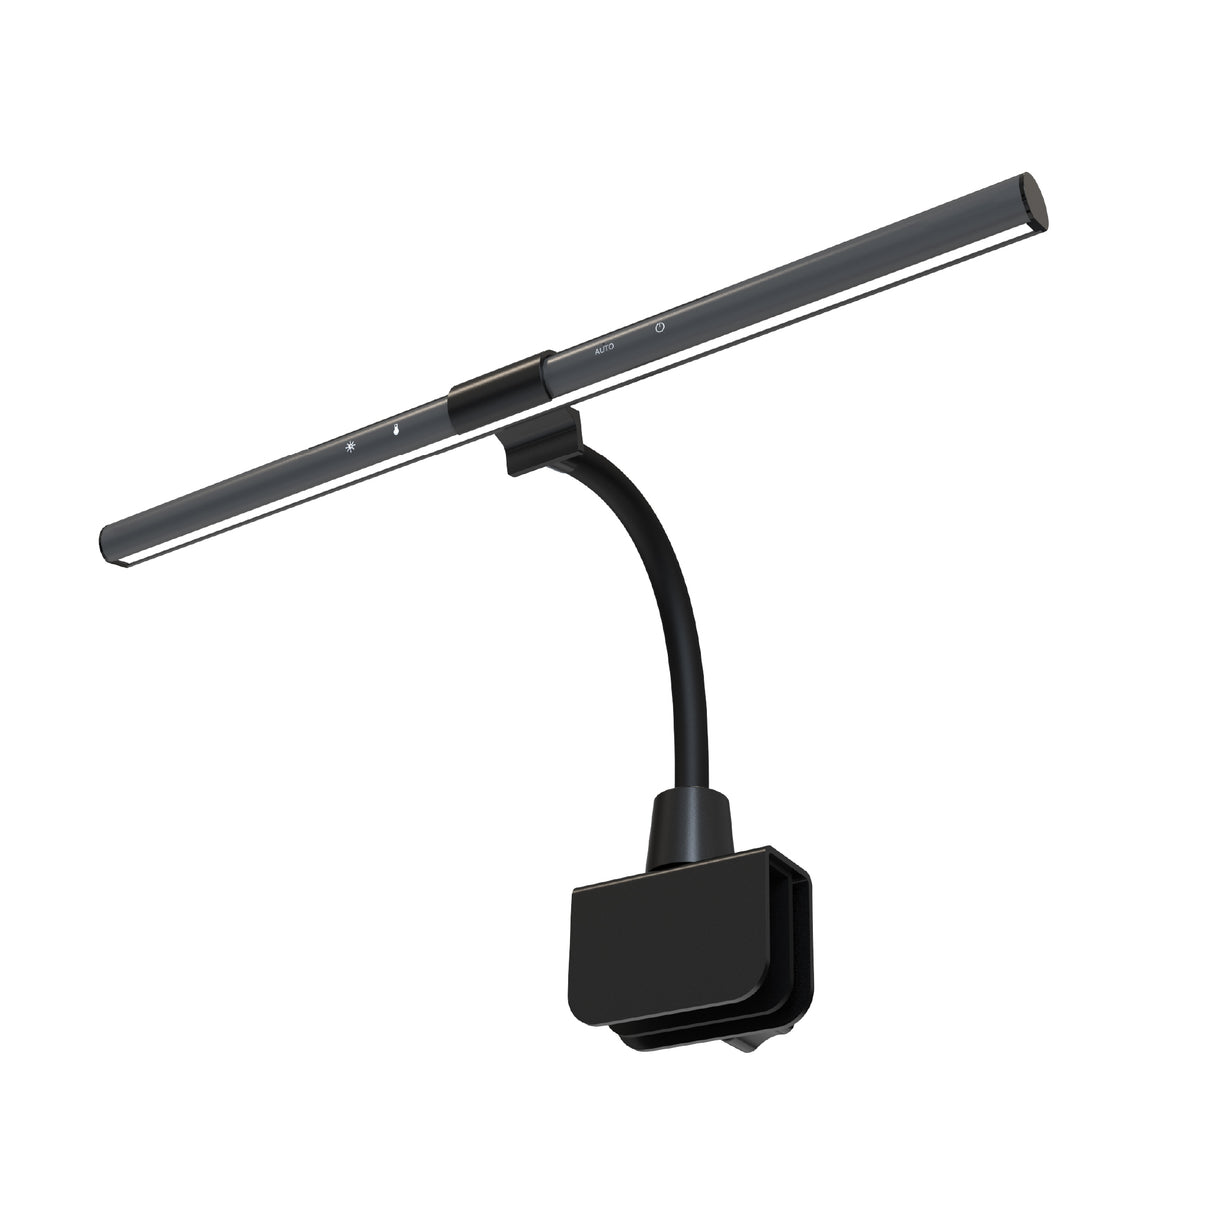 Archilight Melodia Mobile Music Stand Lamp